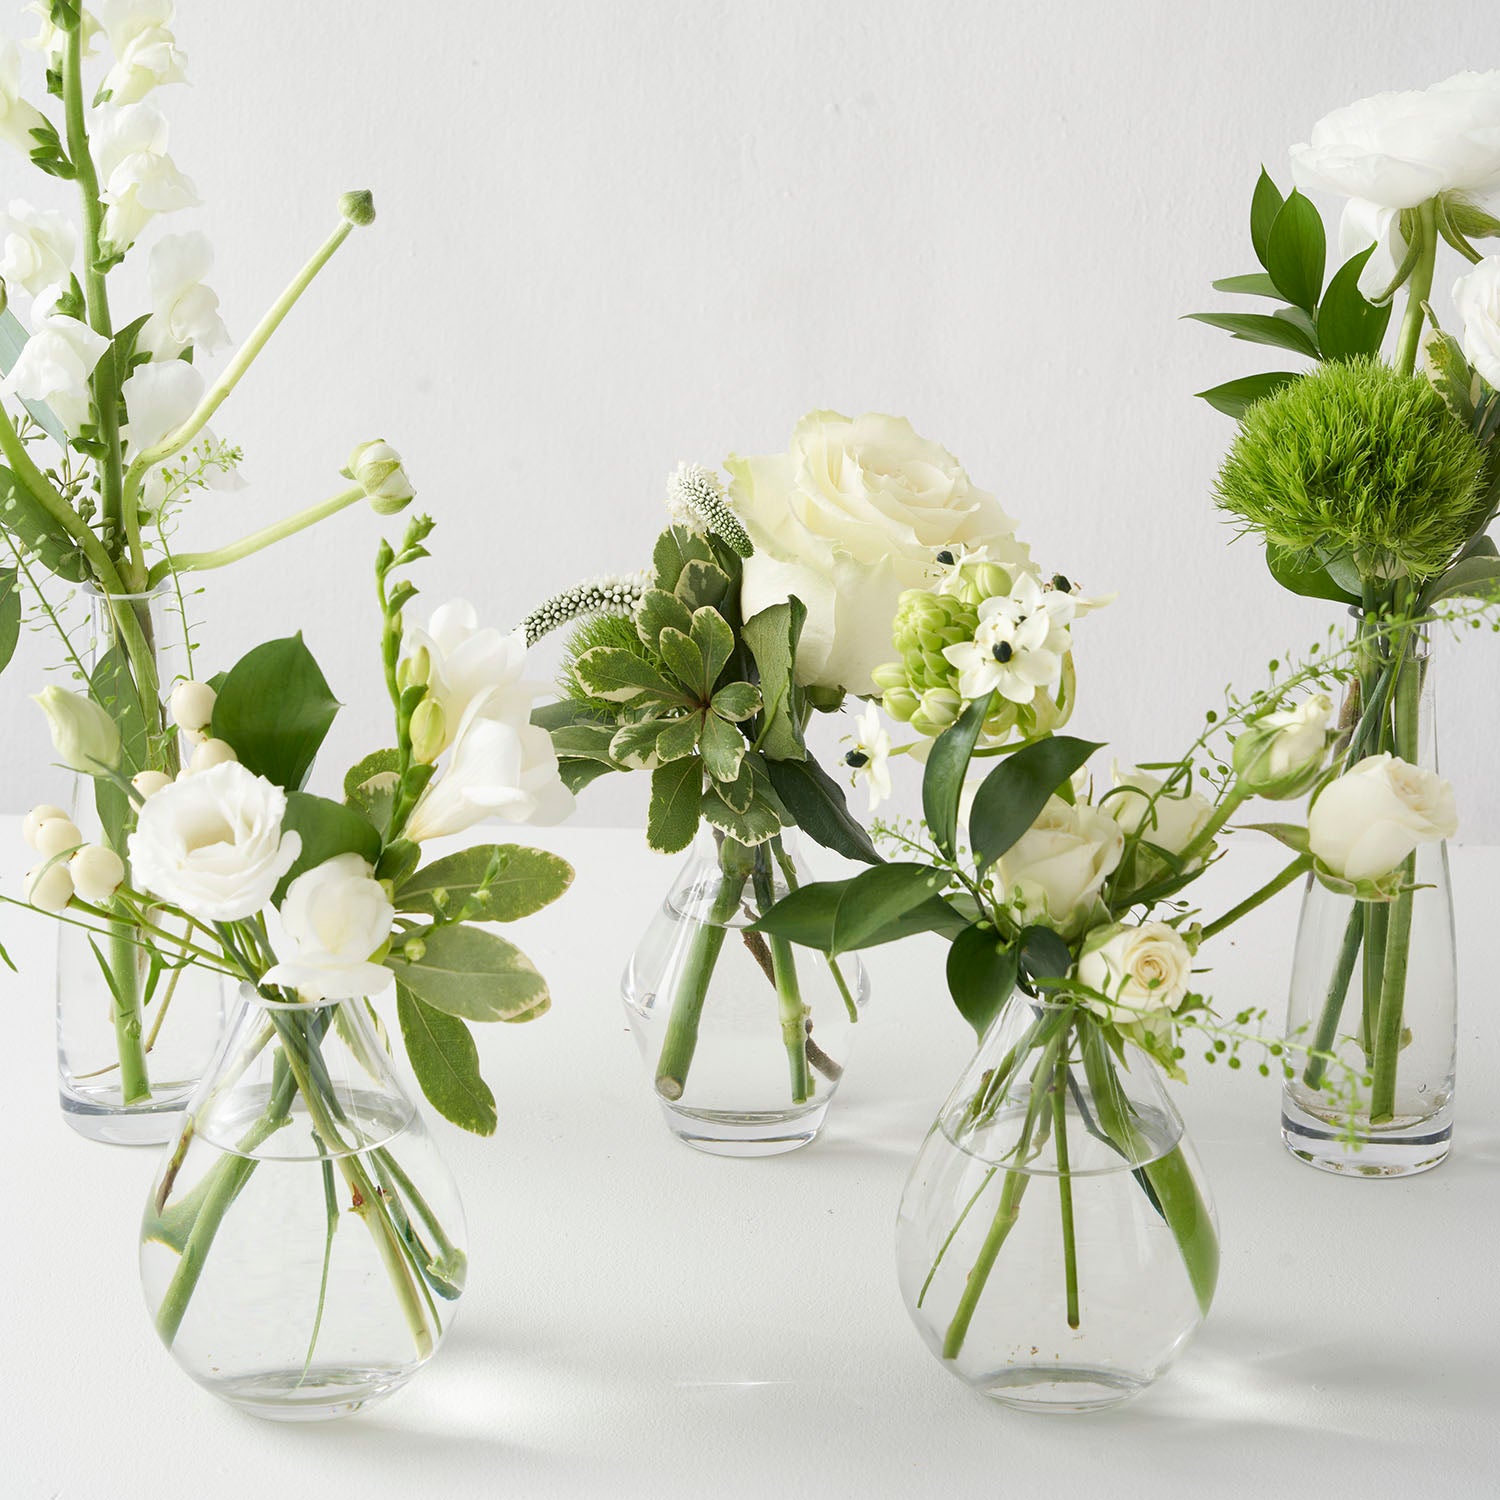 Five small glass vases filled with small white and green flowers including roses and snap dragons on white background